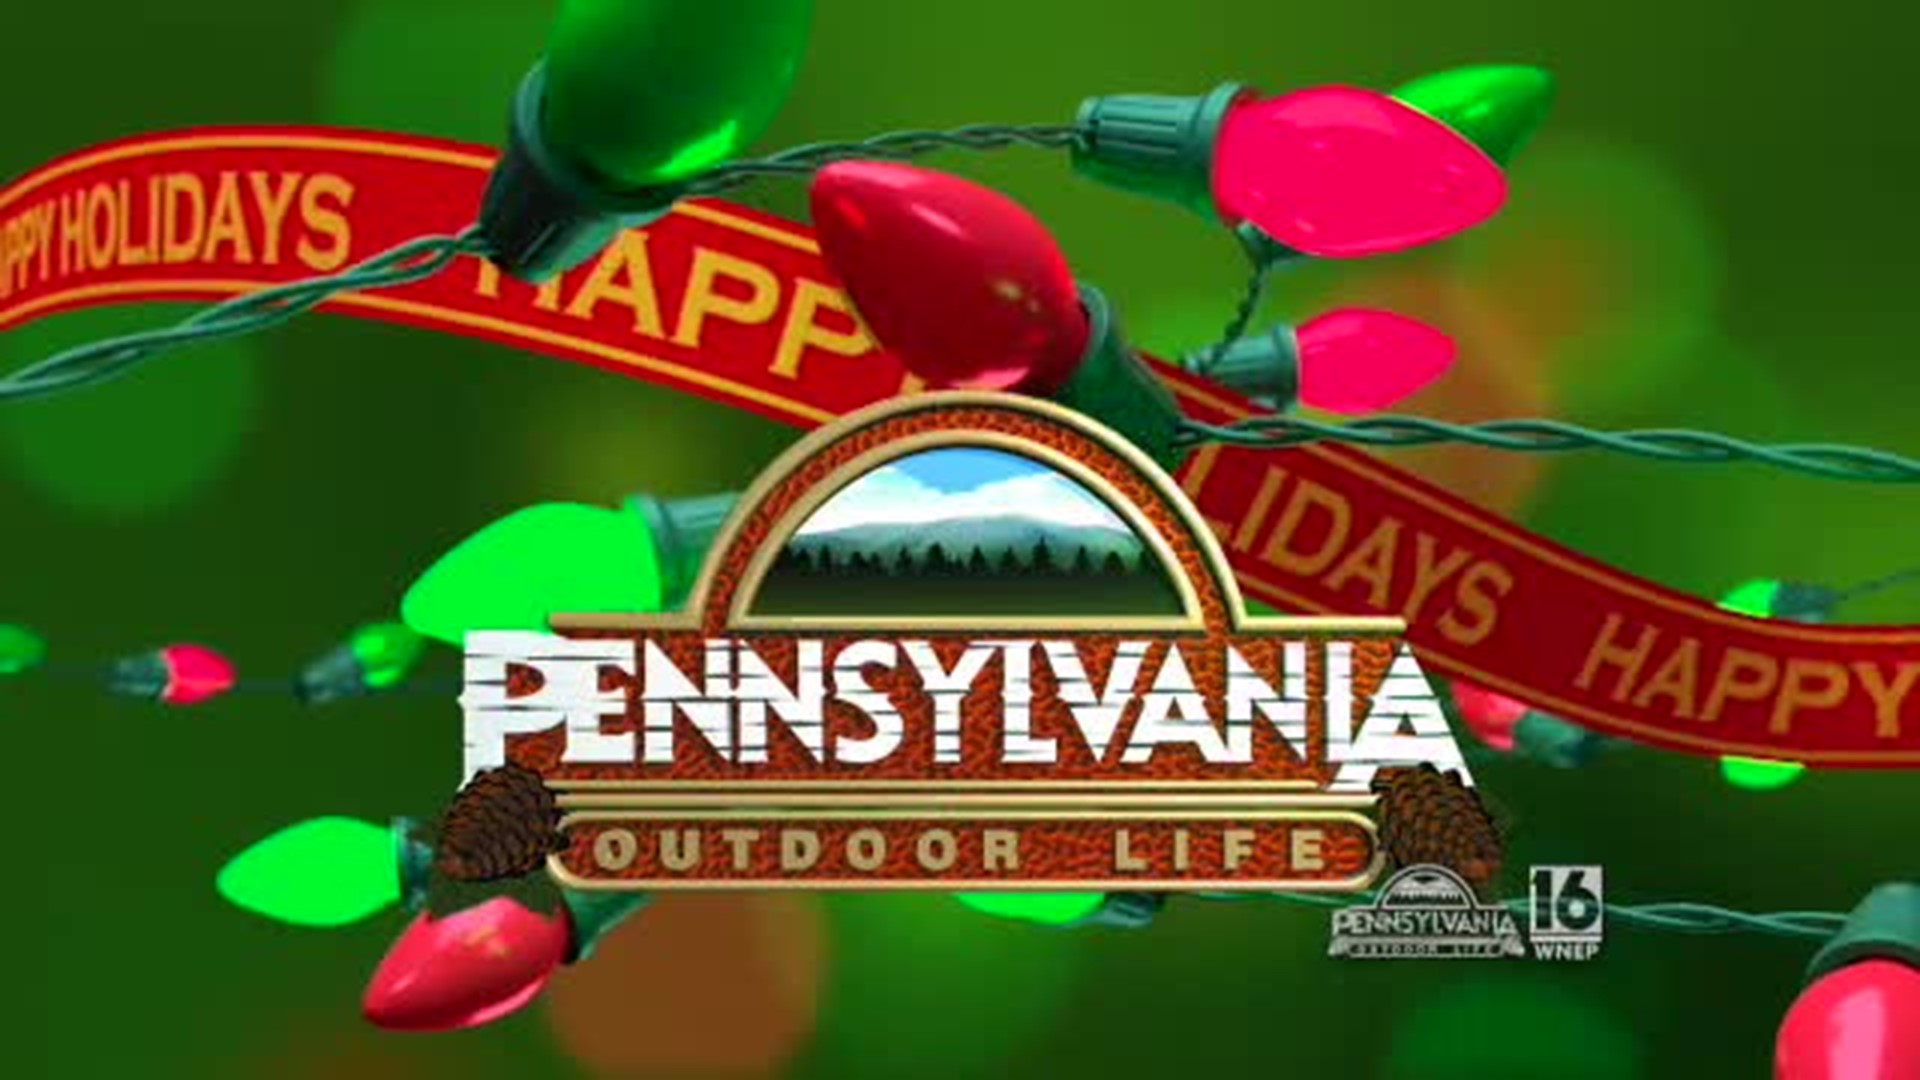 Merry Christmas from the Pennsylvania Outdoor Life Team